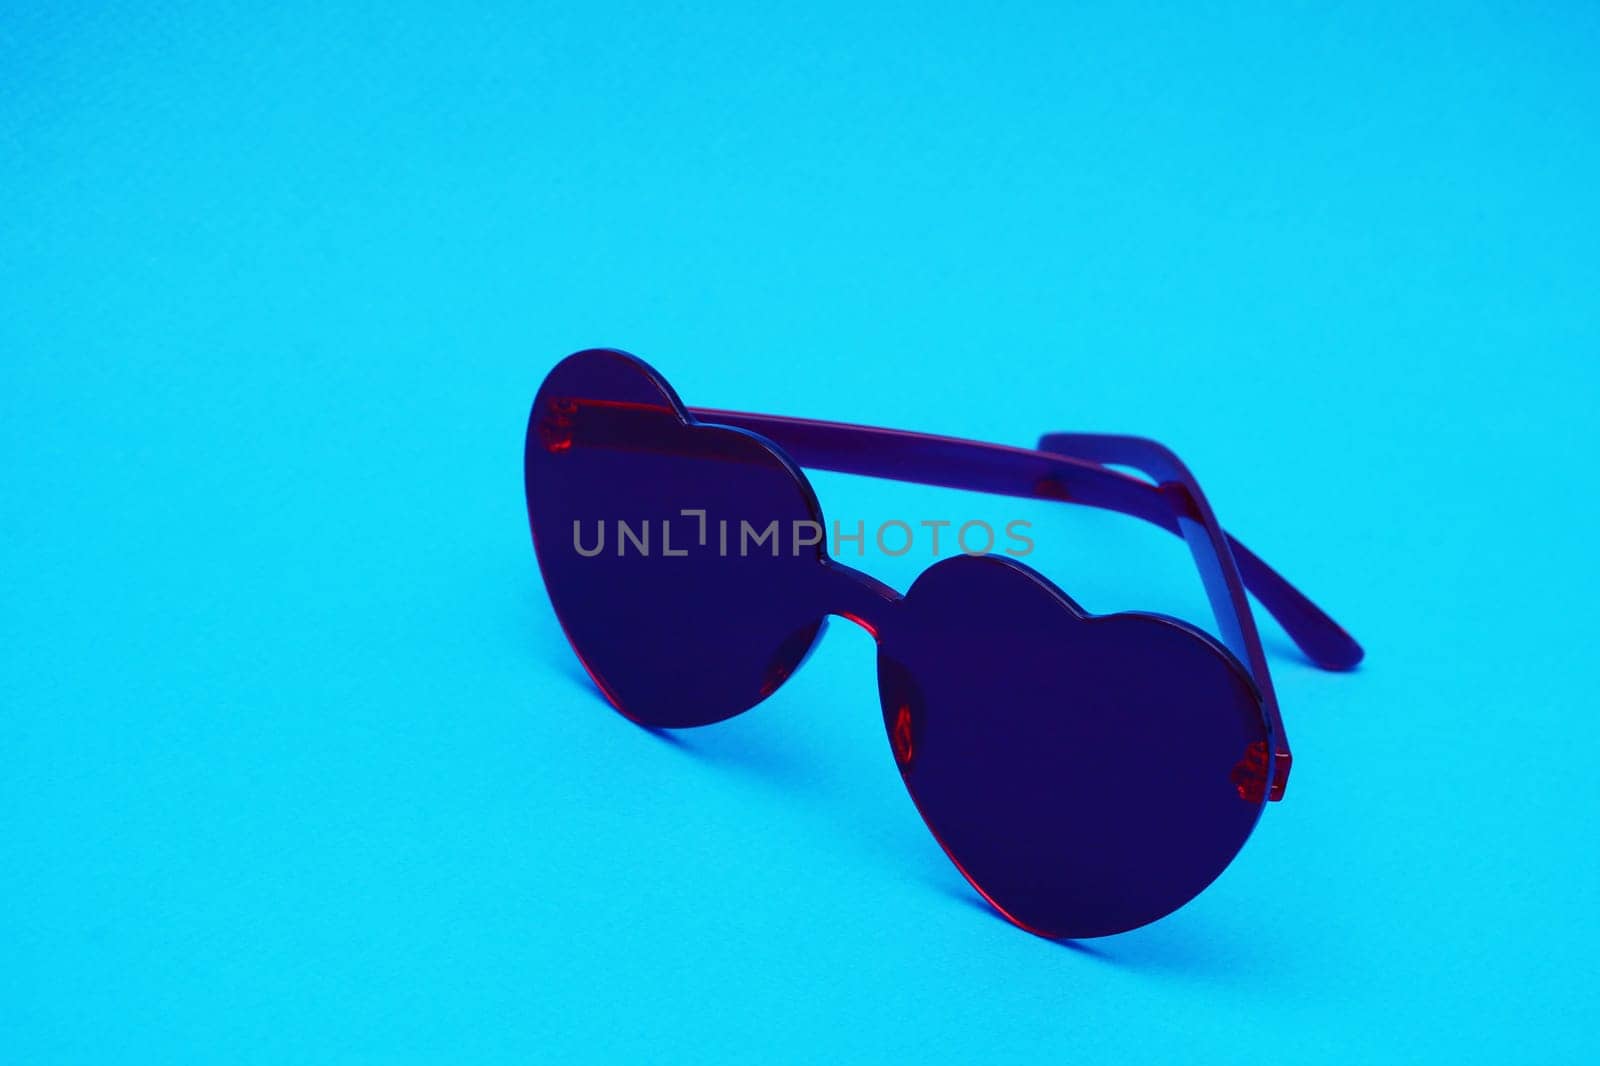 Heart-shaped glamor glasses in dark red color in the shape of a heart on a blue paper background.